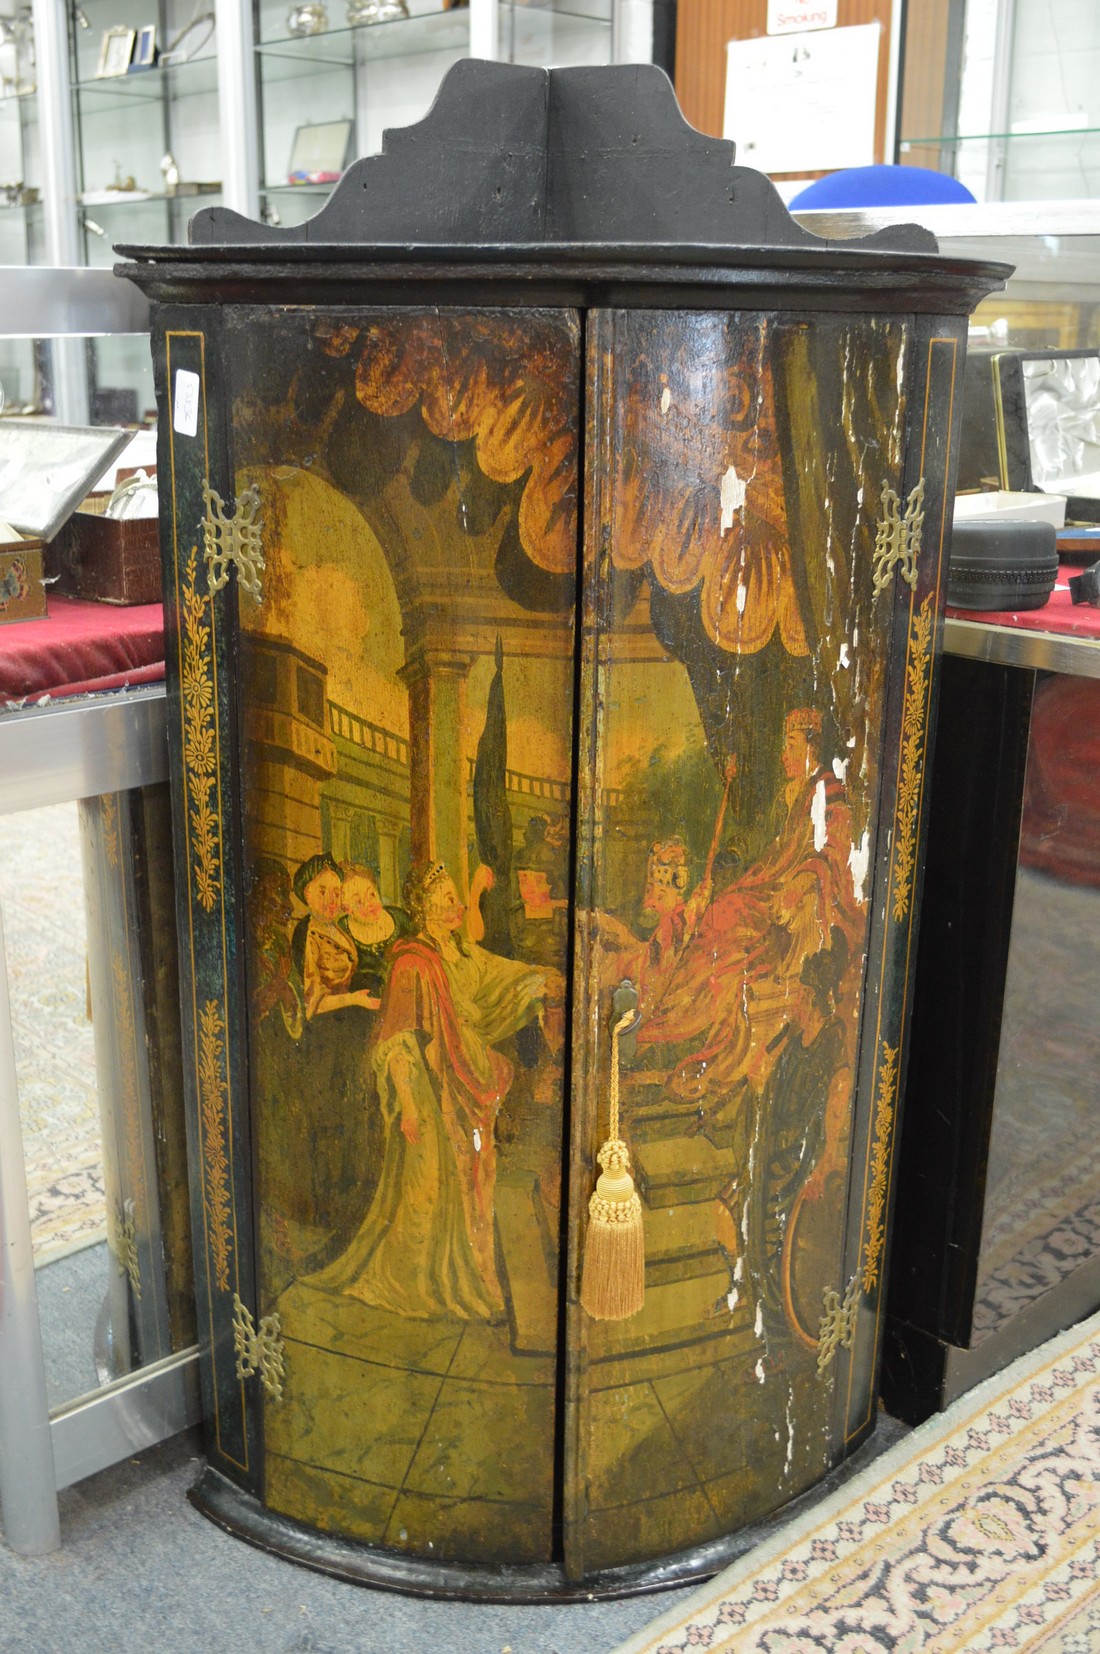 A George III lacquer bow front hanging corner cupboard with painted decoration depicting a classical